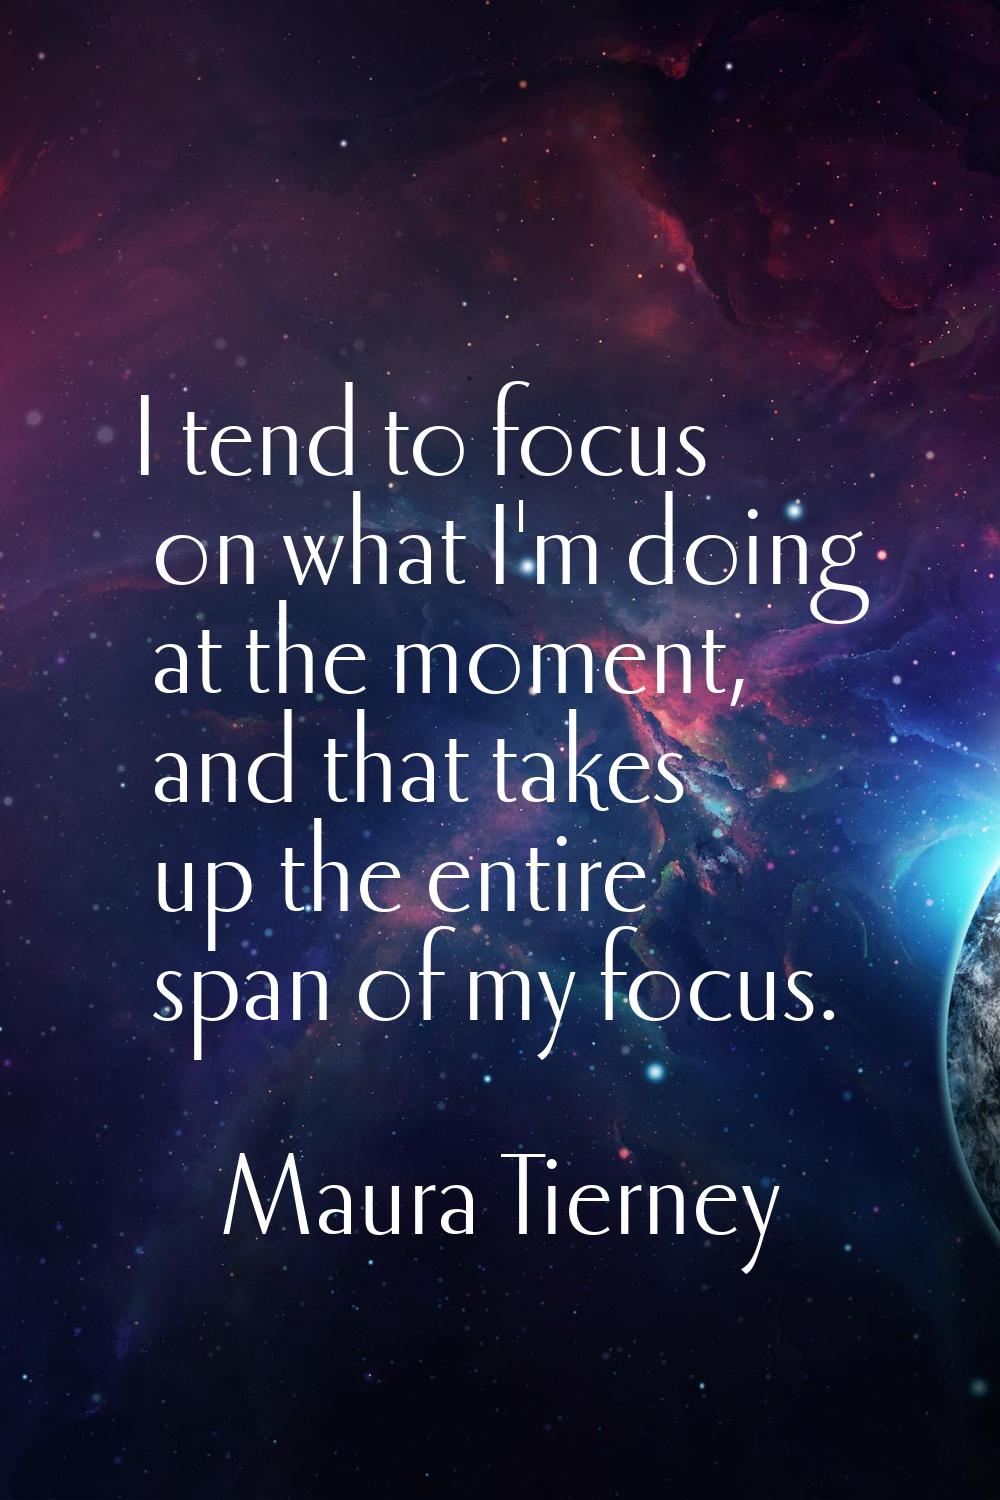 I tend to focus on what I'm doing at the moment, and that takes up the entire span of my focus.